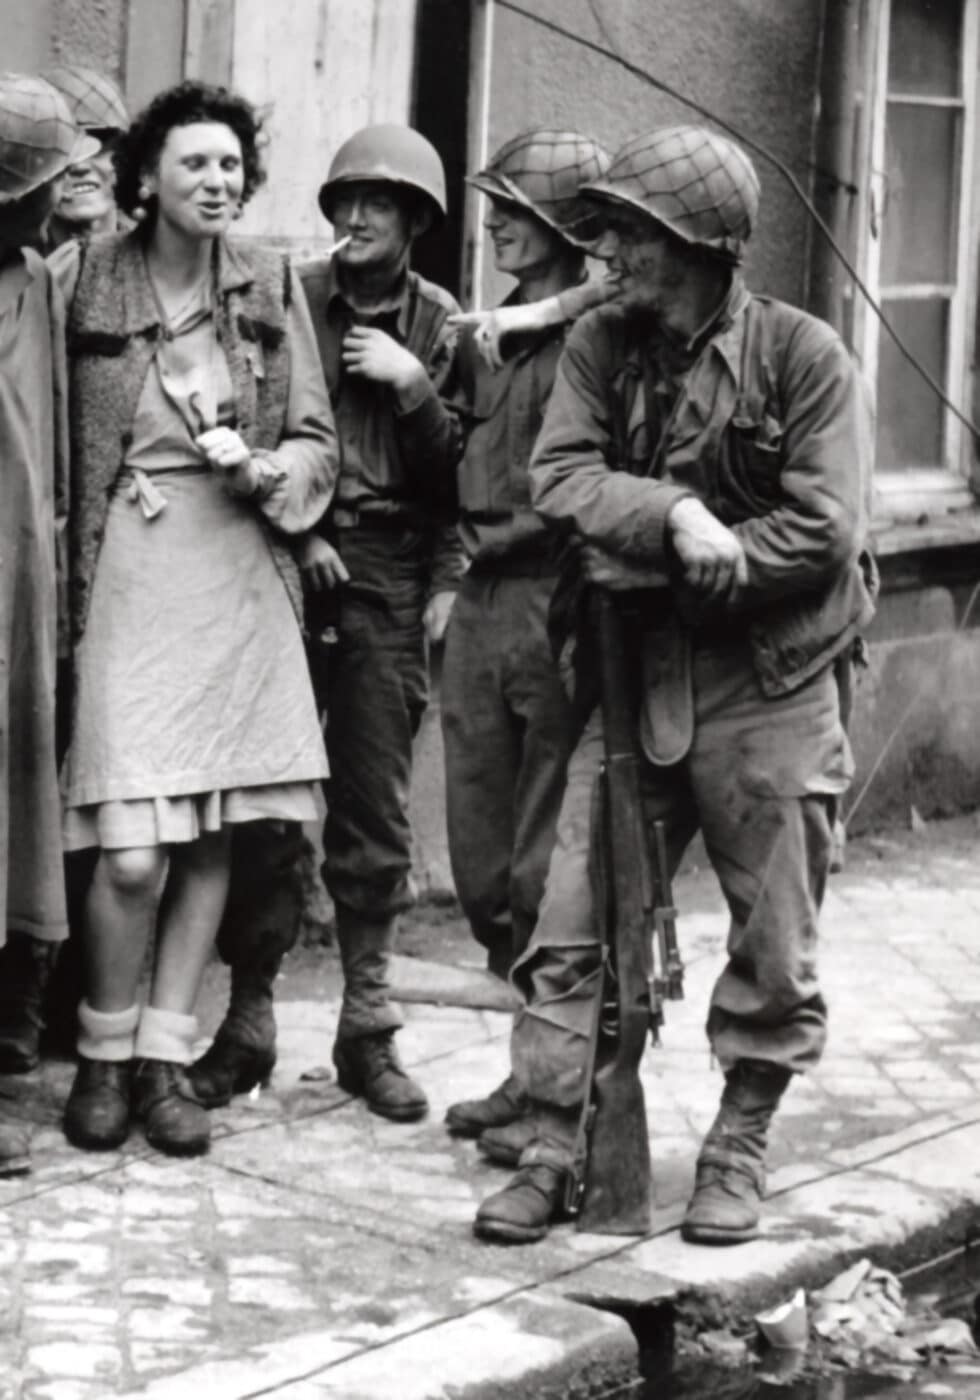 Soldier with Springfield sniper rifle talking with a woman and other soldiers in Cherbourg in June 1944